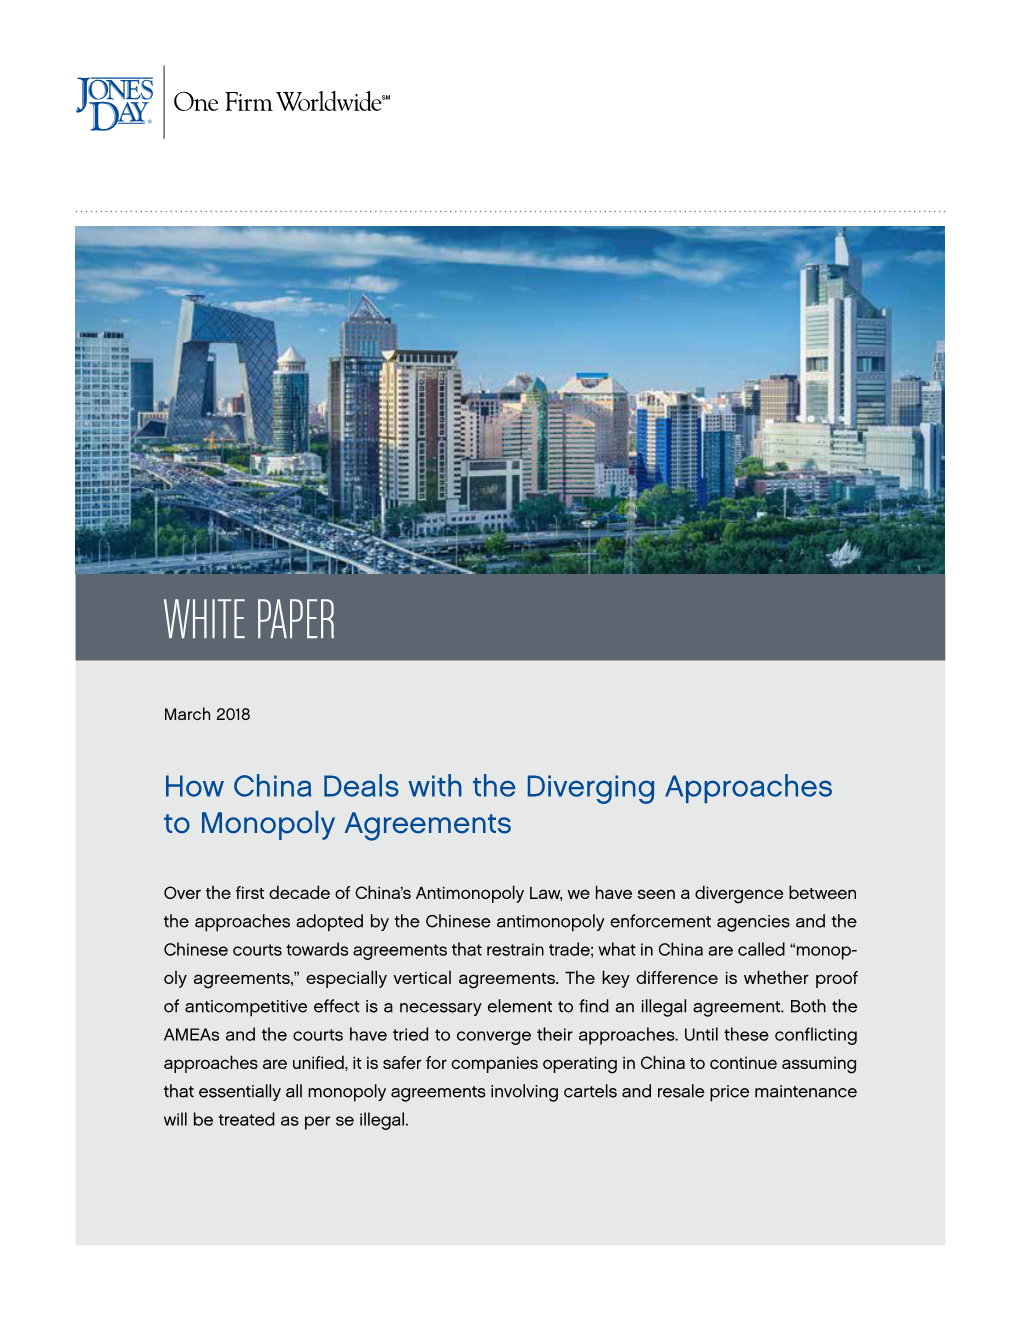 How China Deals with the Diverging Approaches to Monopoly Agreements